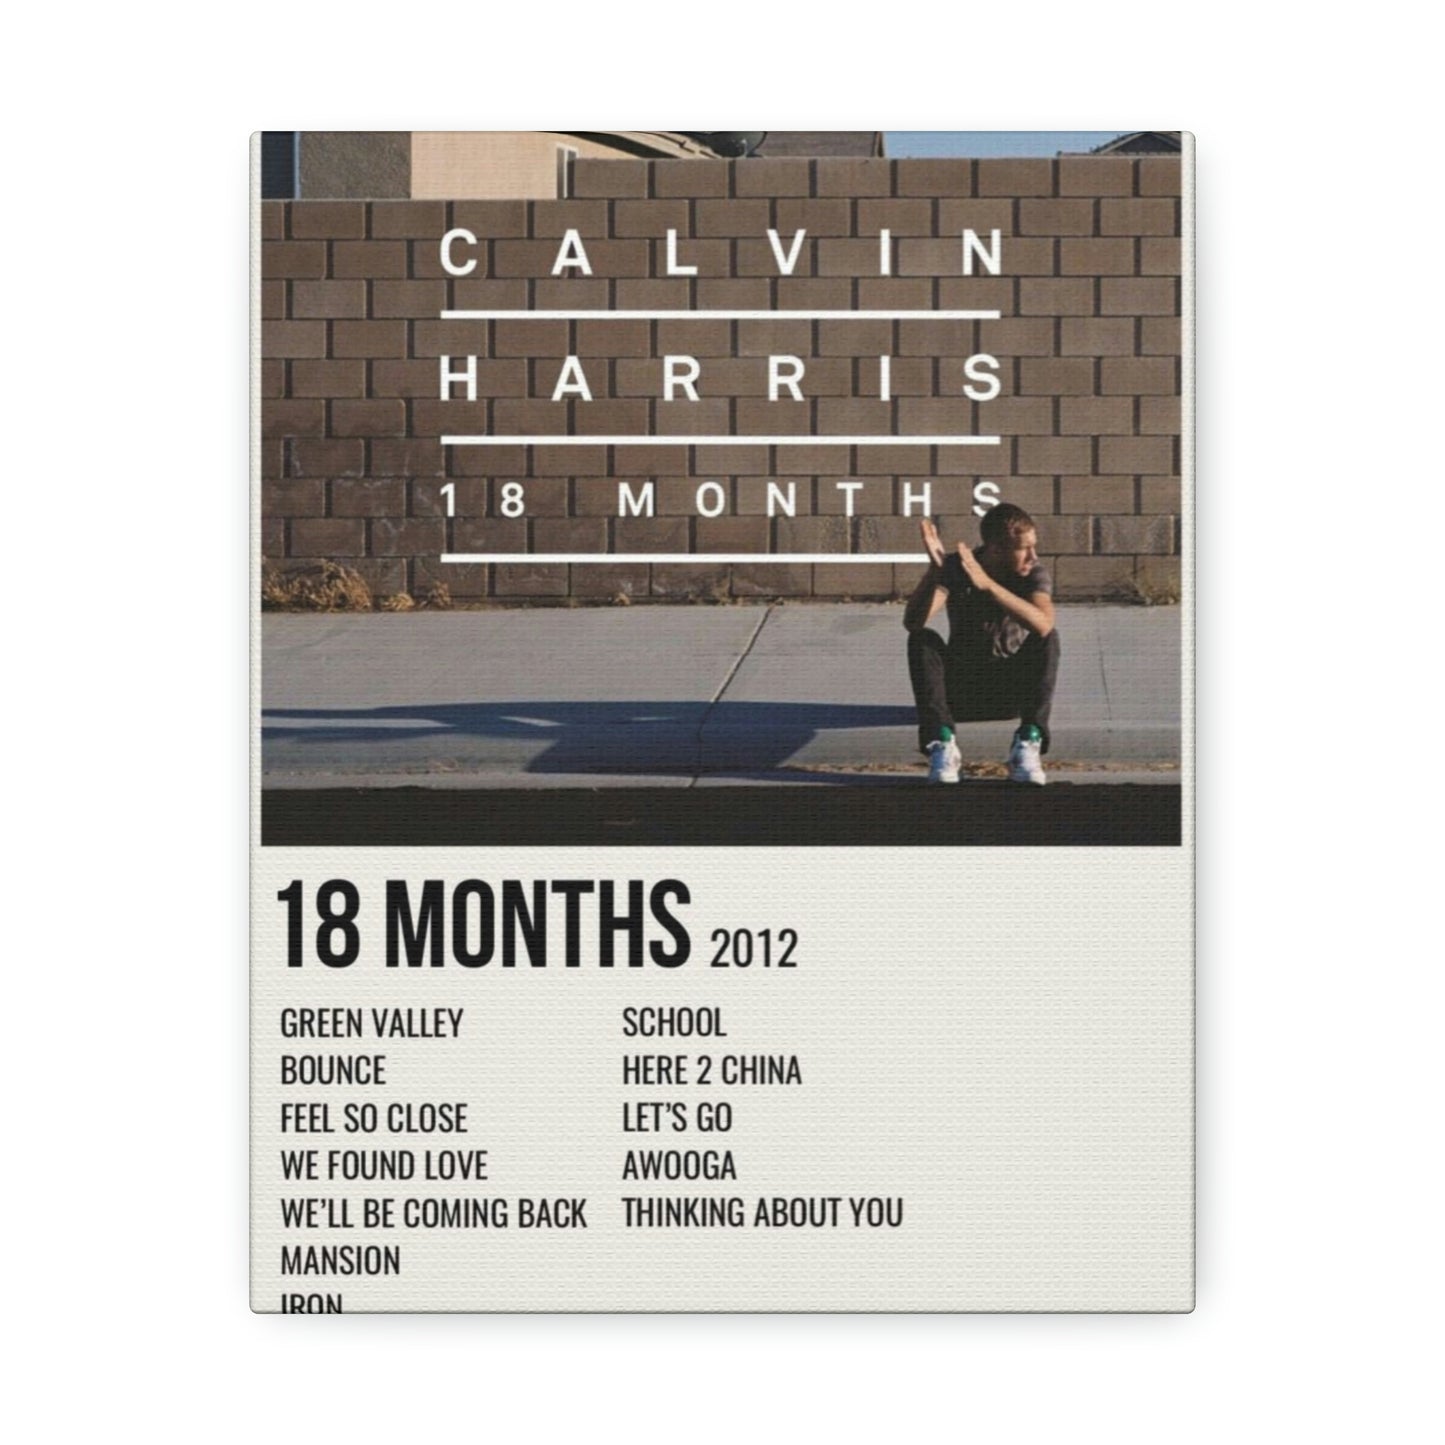 Calvin Harris 18 MONTHS - By SwimOrDrownUK - Satin Canvas - Stretched